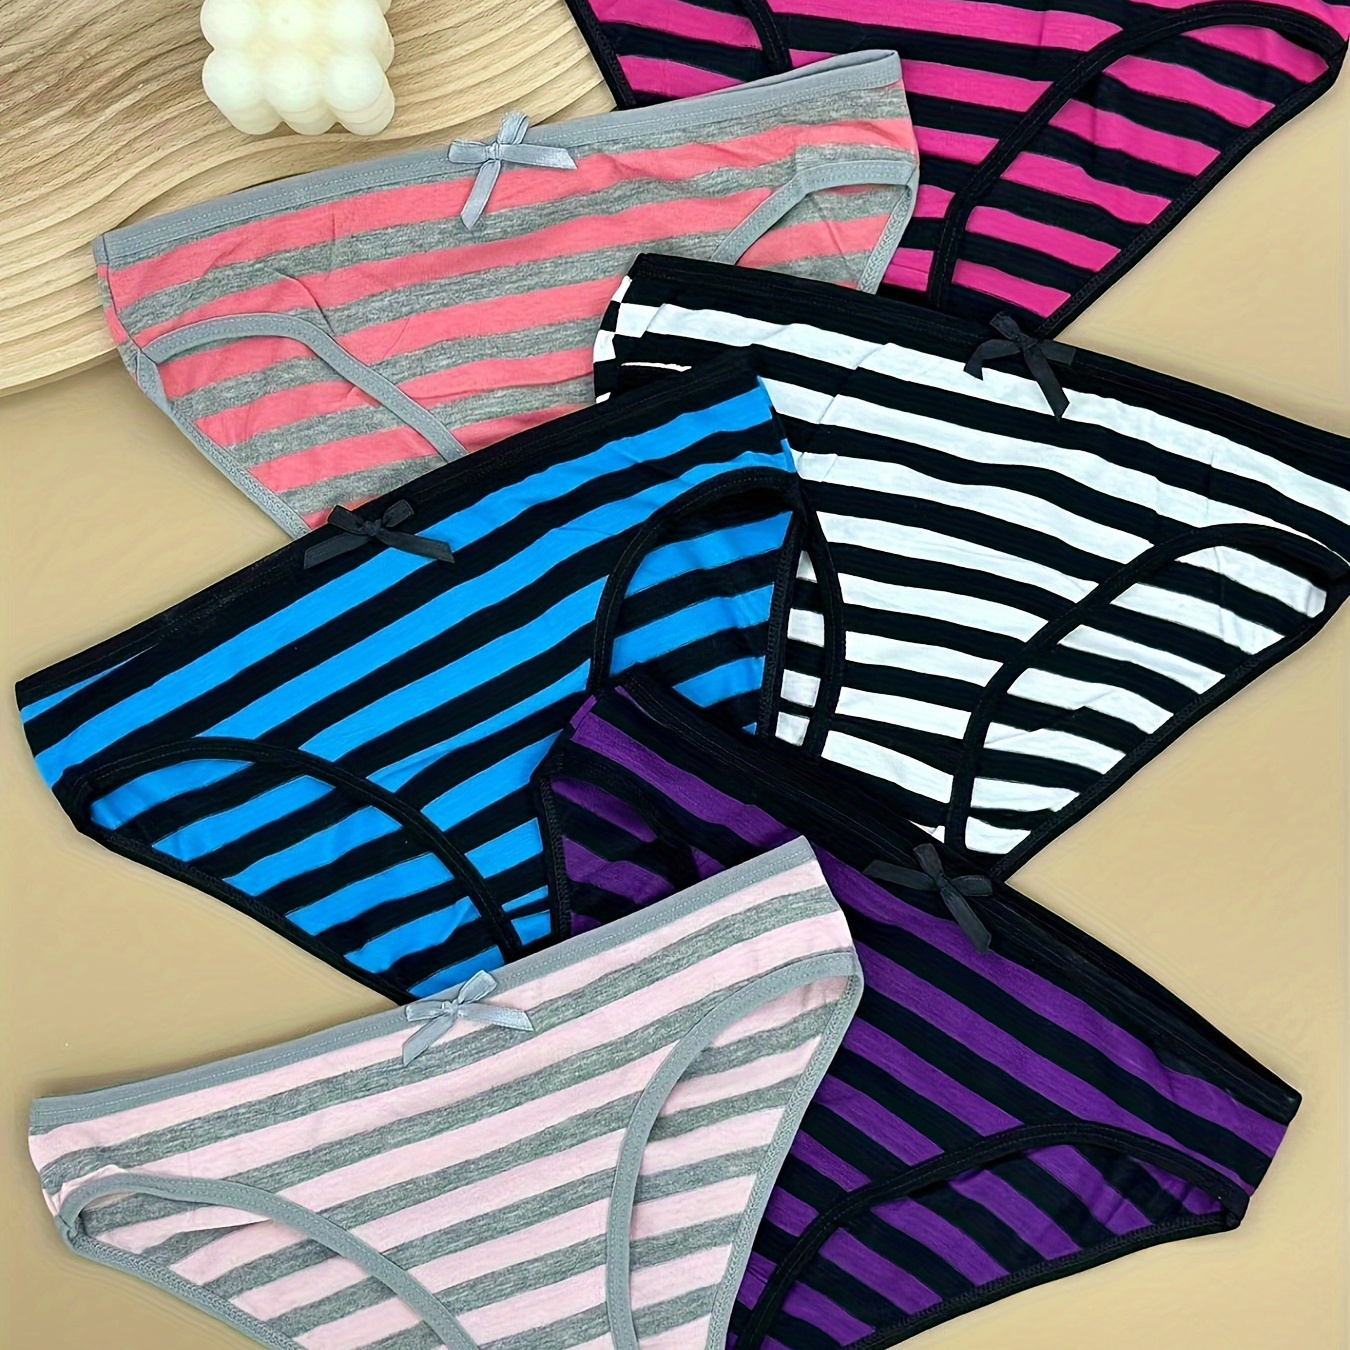 

6pcs Striped Bow Tie Briefs, Comfy & Breathable Stretchy Intimates Panties, Women's Lingerie & Underwear